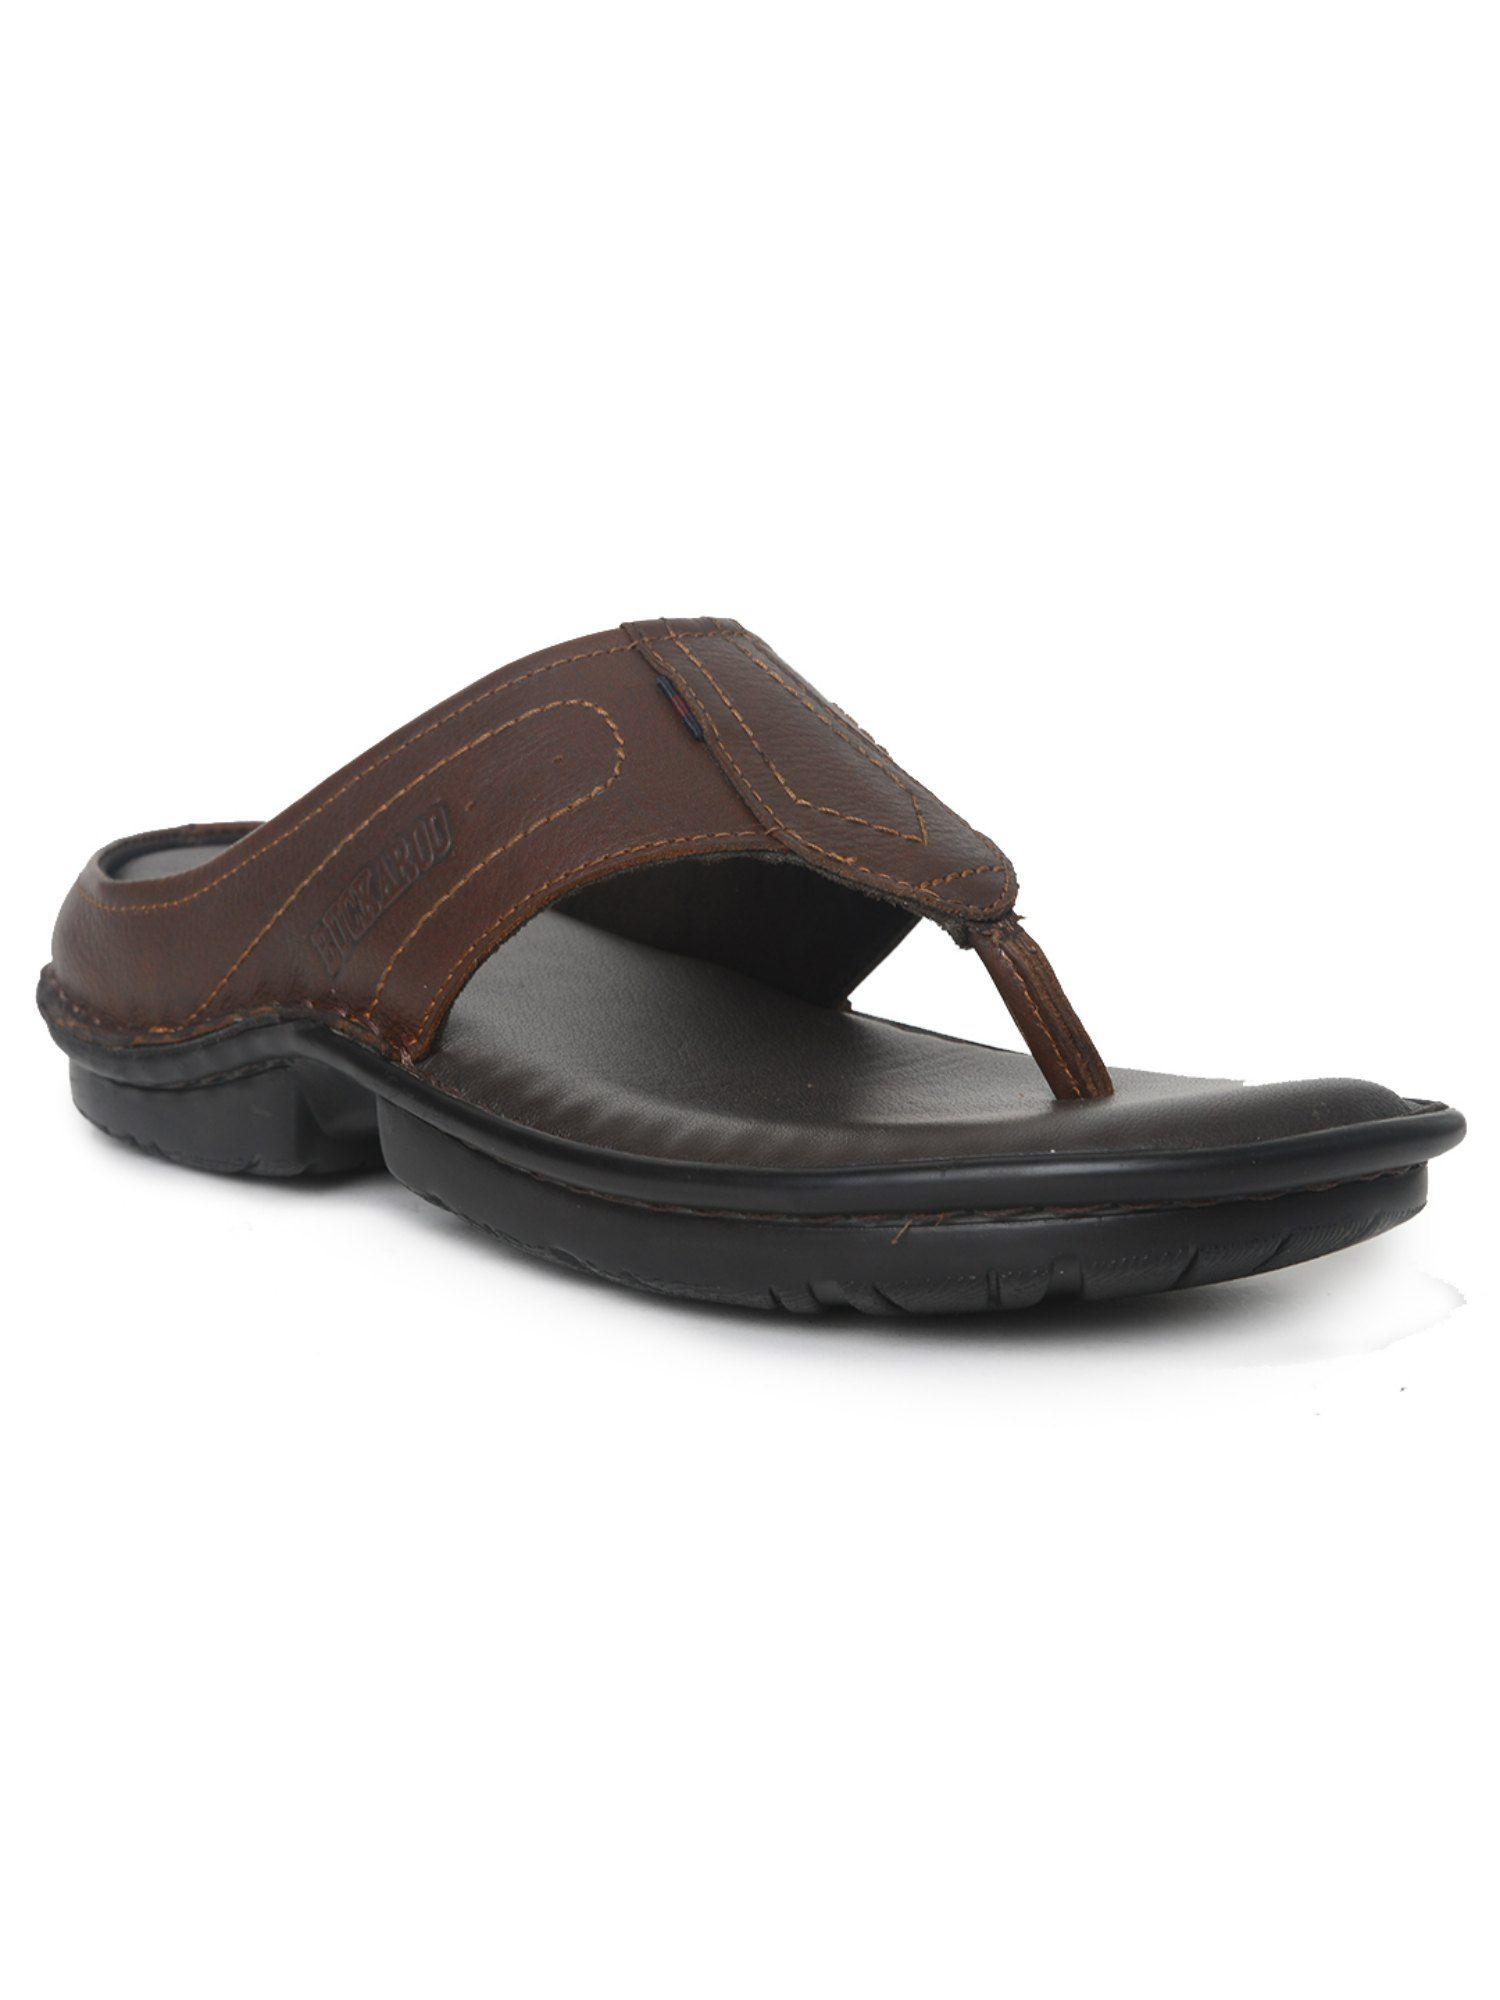 NEW MORRIS Genuine Leather Brown Casual Open Sandal for Men